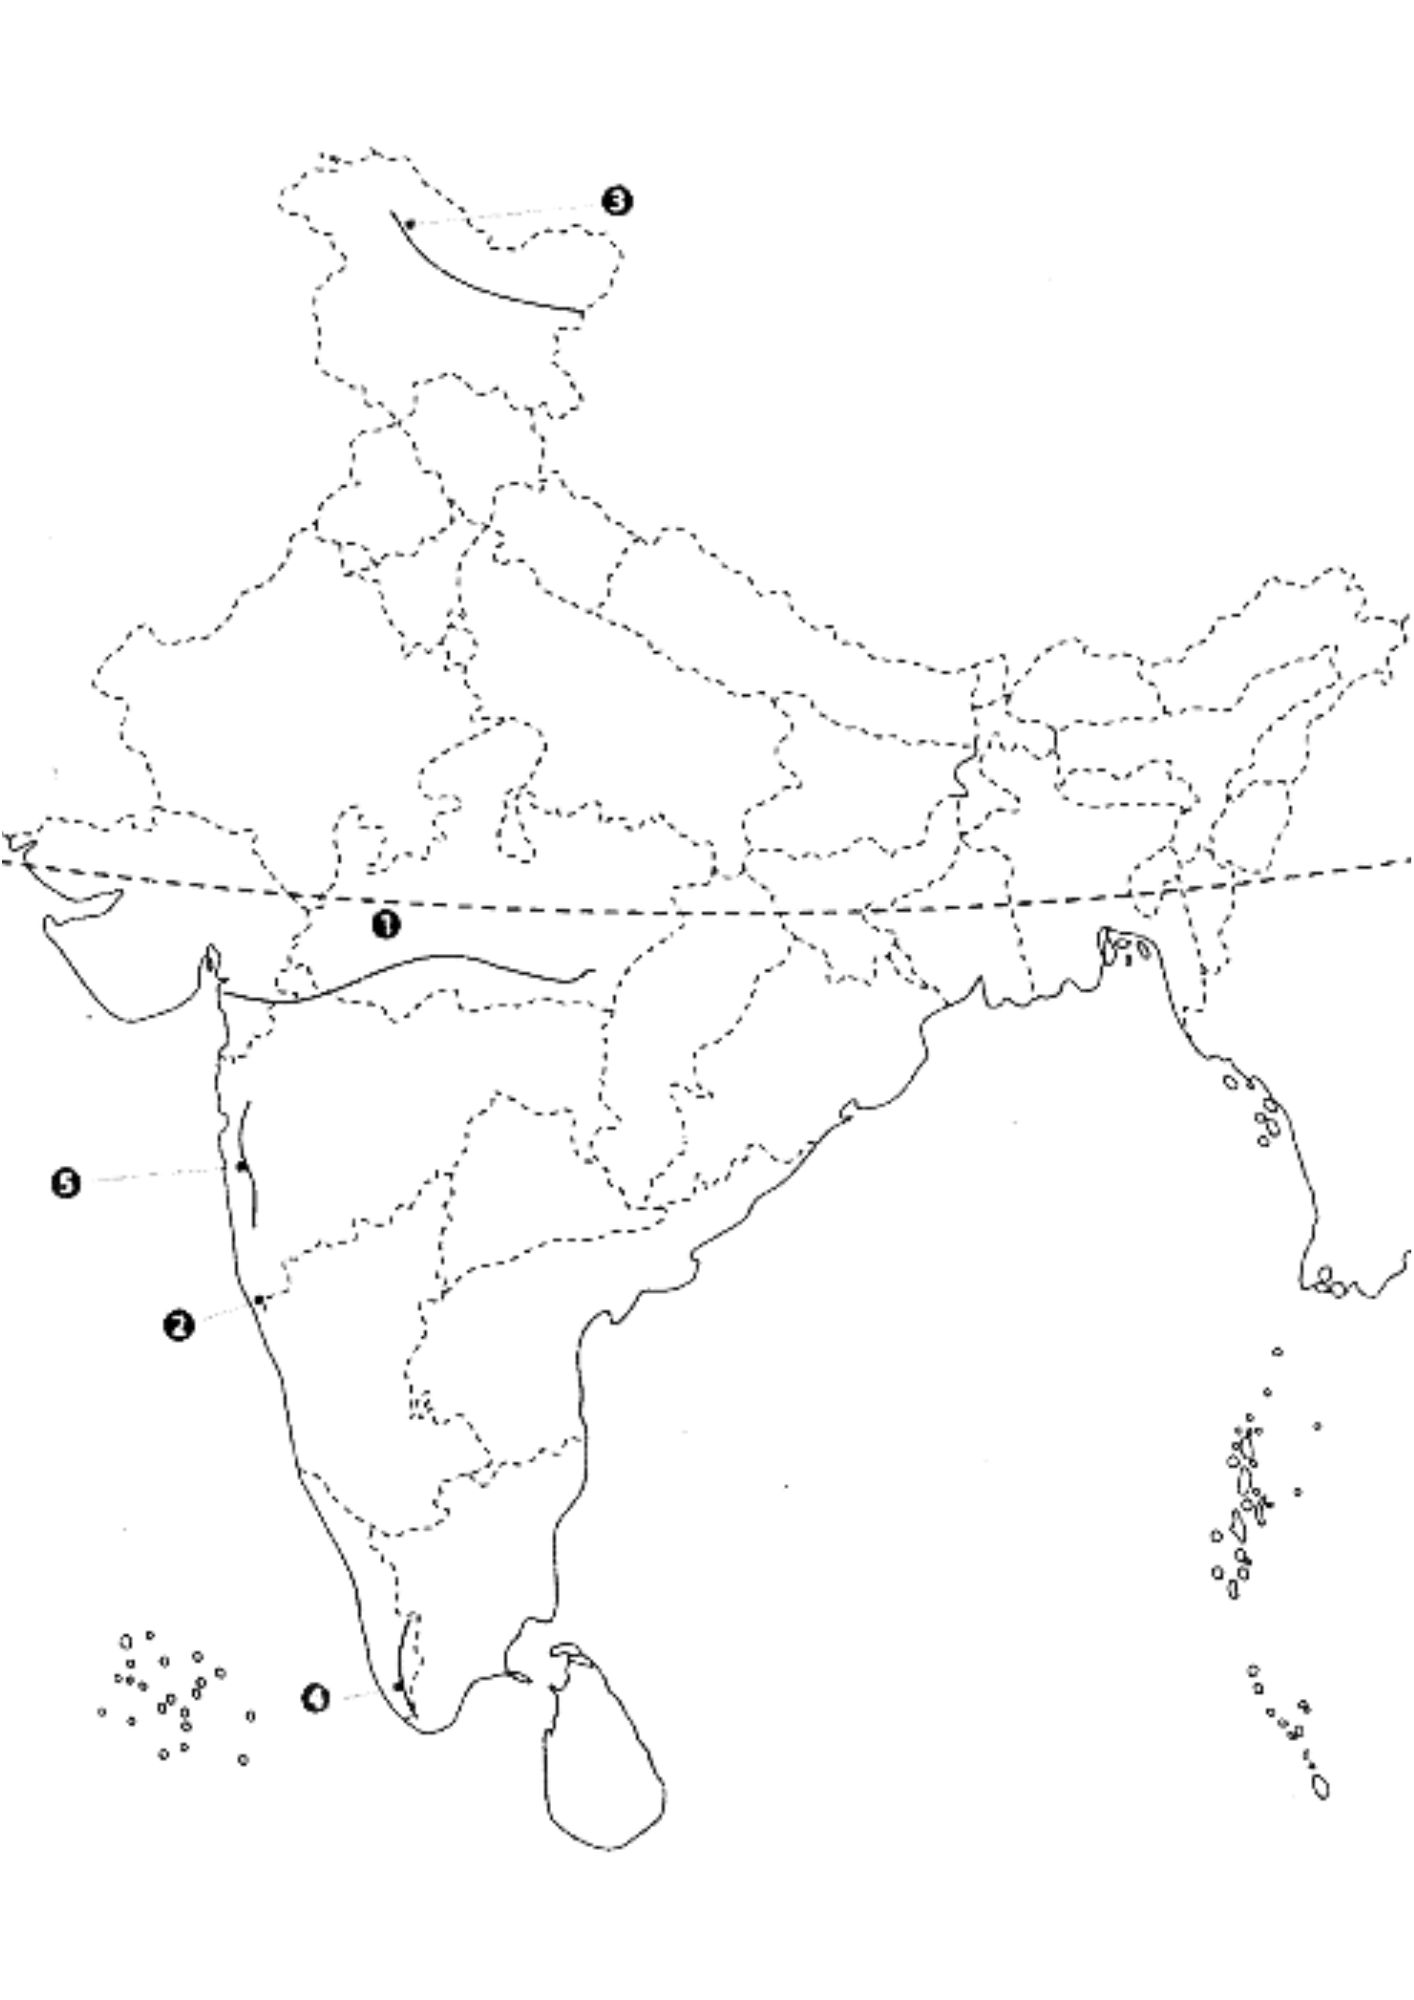 map of physical features of india